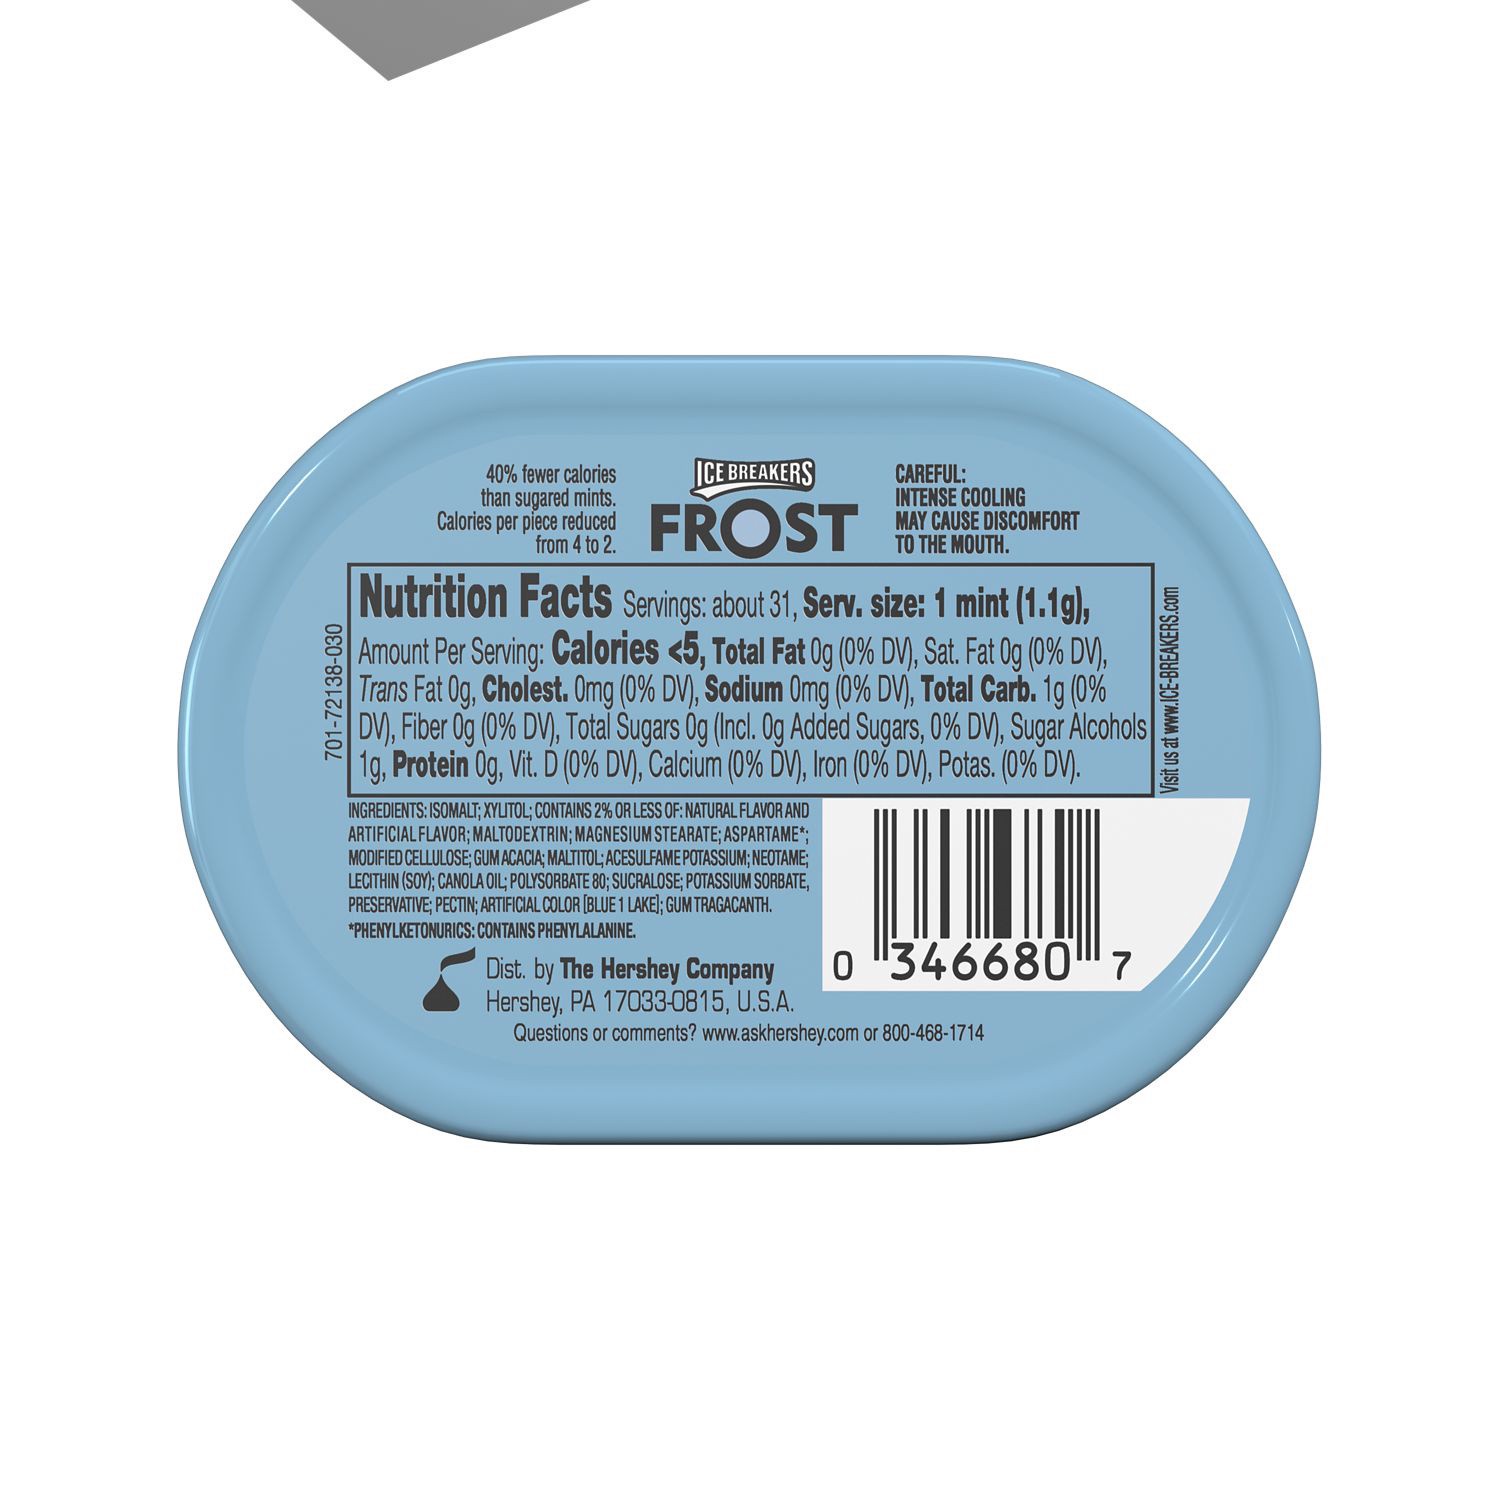 slide 5 of 5, Ice Breakers FROST Peppermint Flavored Sugar Free Breath Mints, 1.2 oz, Tin, 1.2 oz